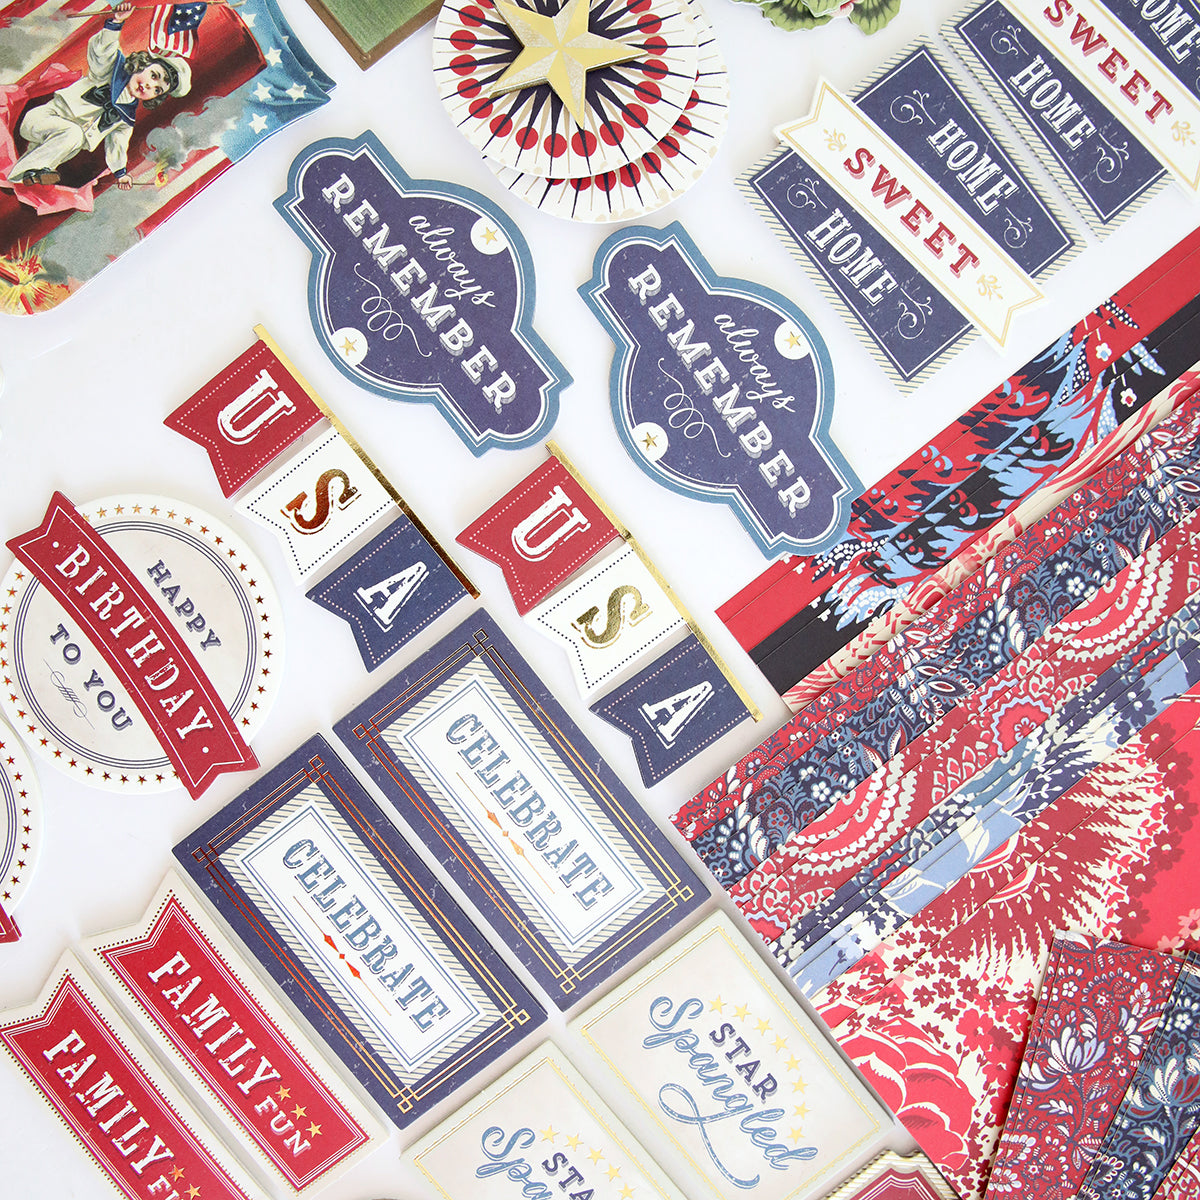 The Madison Paper Crafting Collection of patriotic stickers and papers, featuring vintage spirit, displayed on a table.